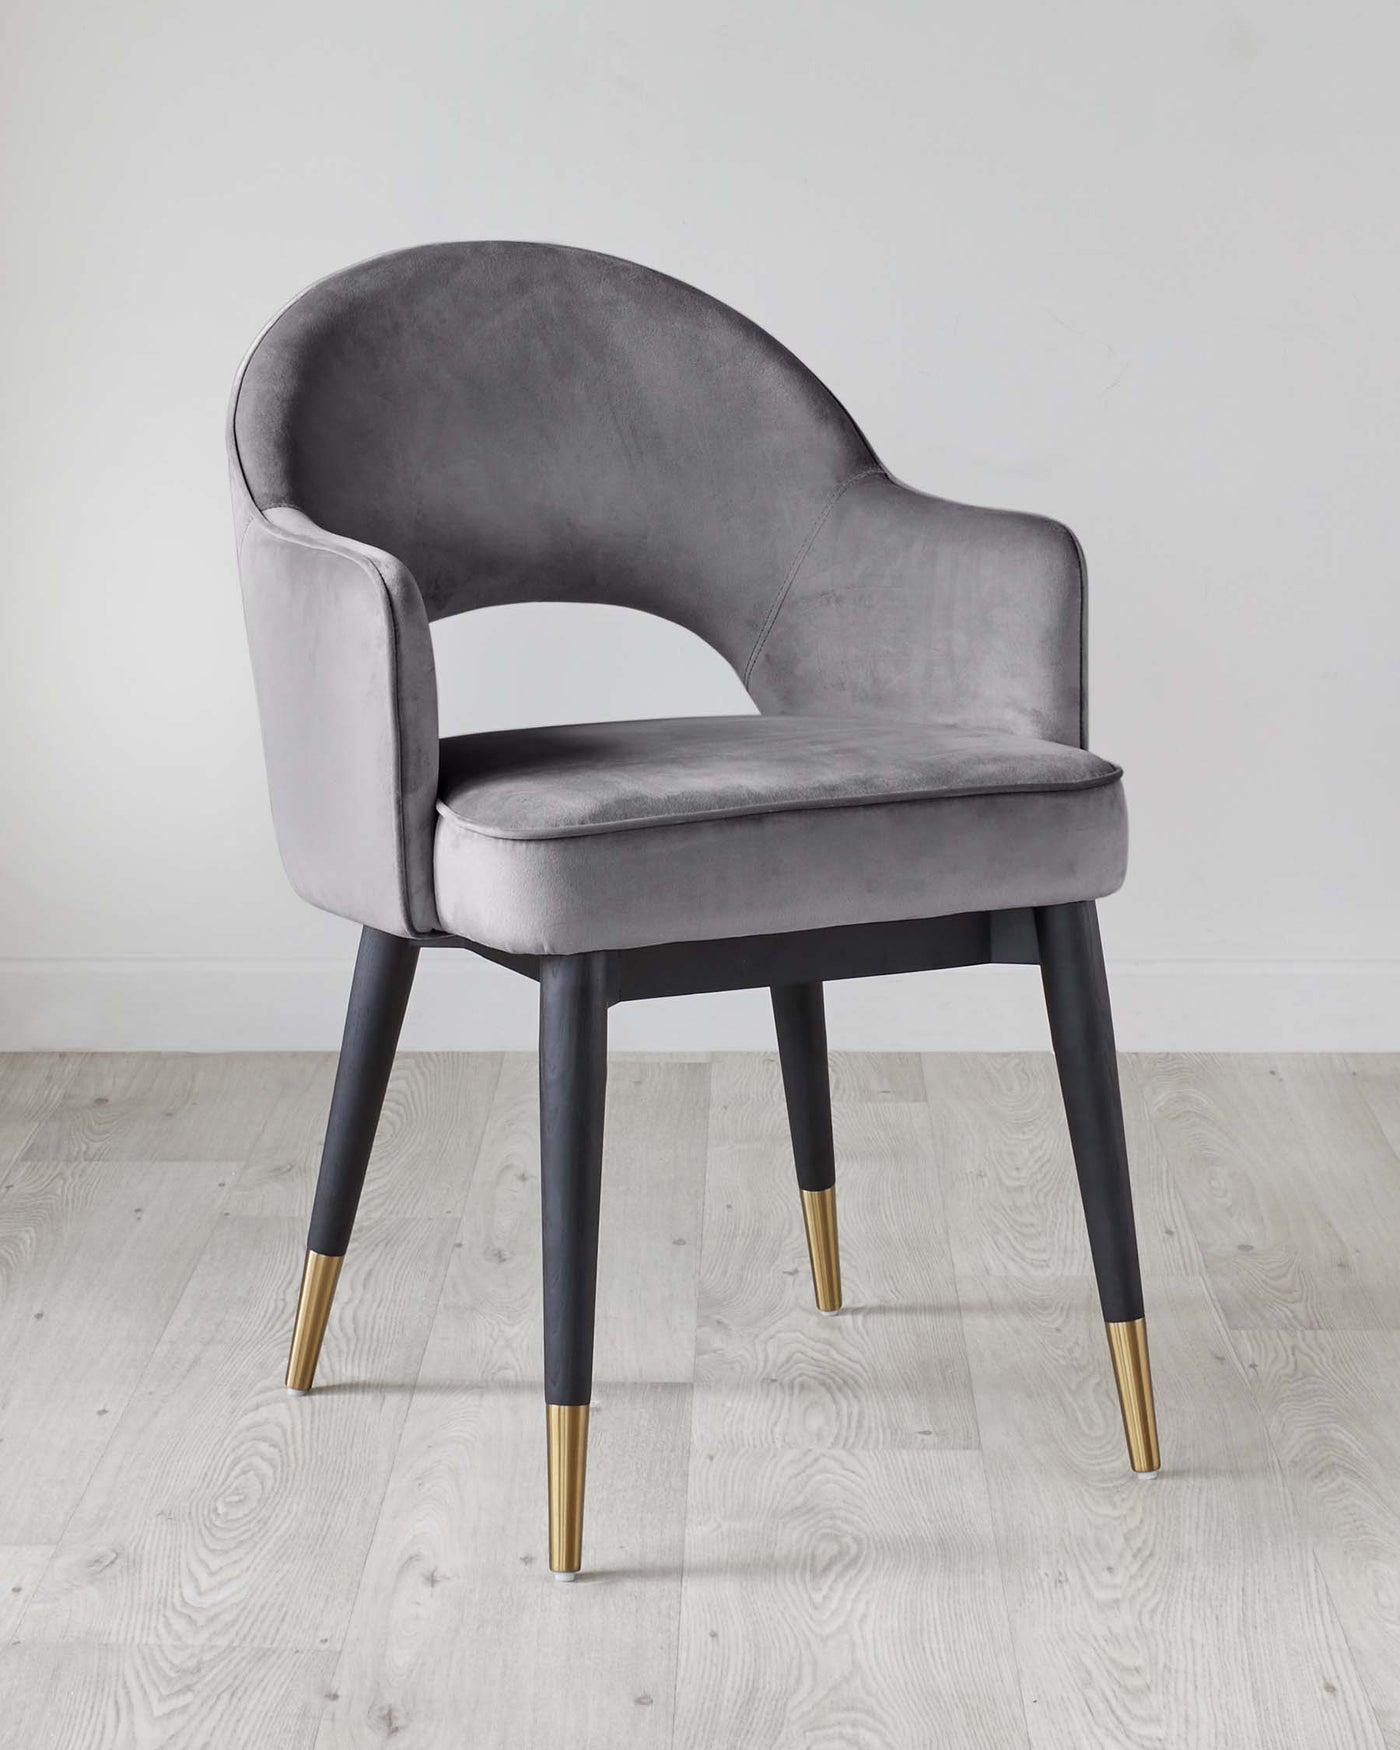 Elegant modern dining chair with velvet upholstery in a soft grey finish, featuring a curved backrest, armless design, cushioned seat, and four tapered legs with contrasting black and gold tips, set against a simplistic white background with a light wood floor.